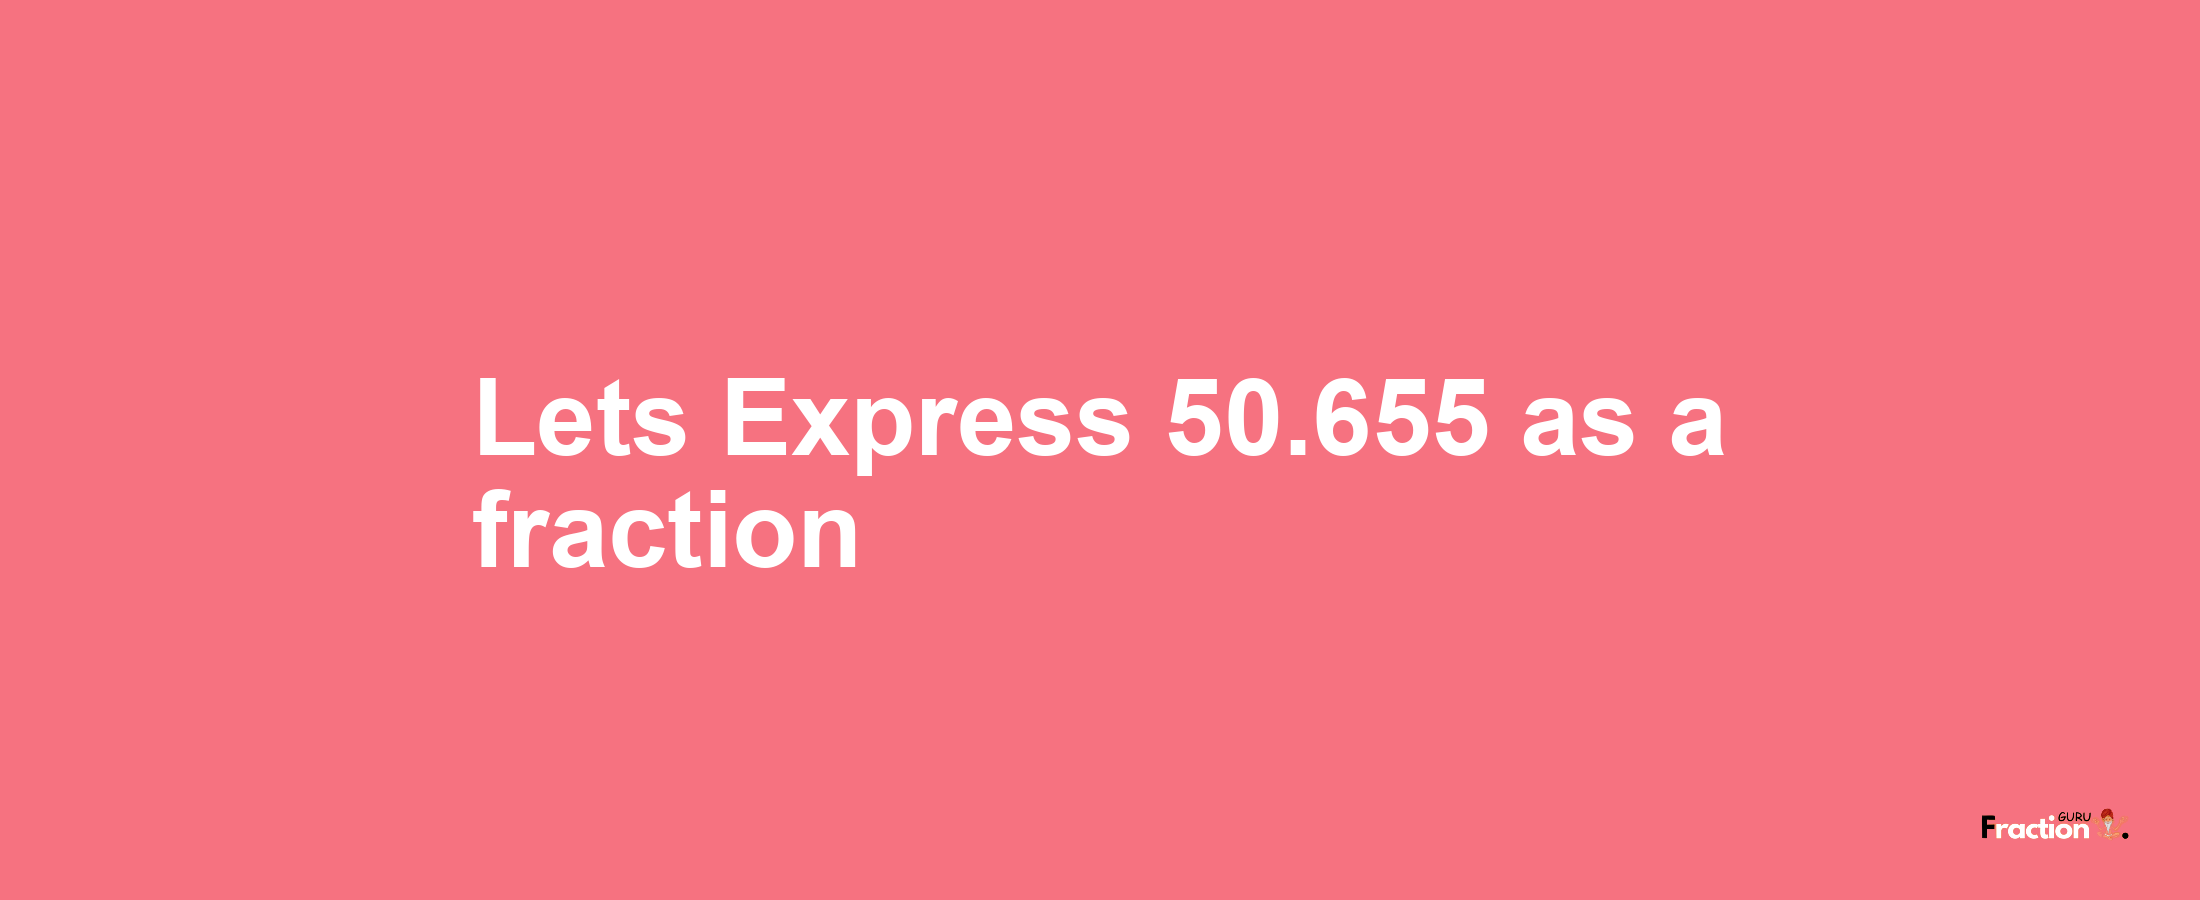 Lets Express 50.655 as afraction